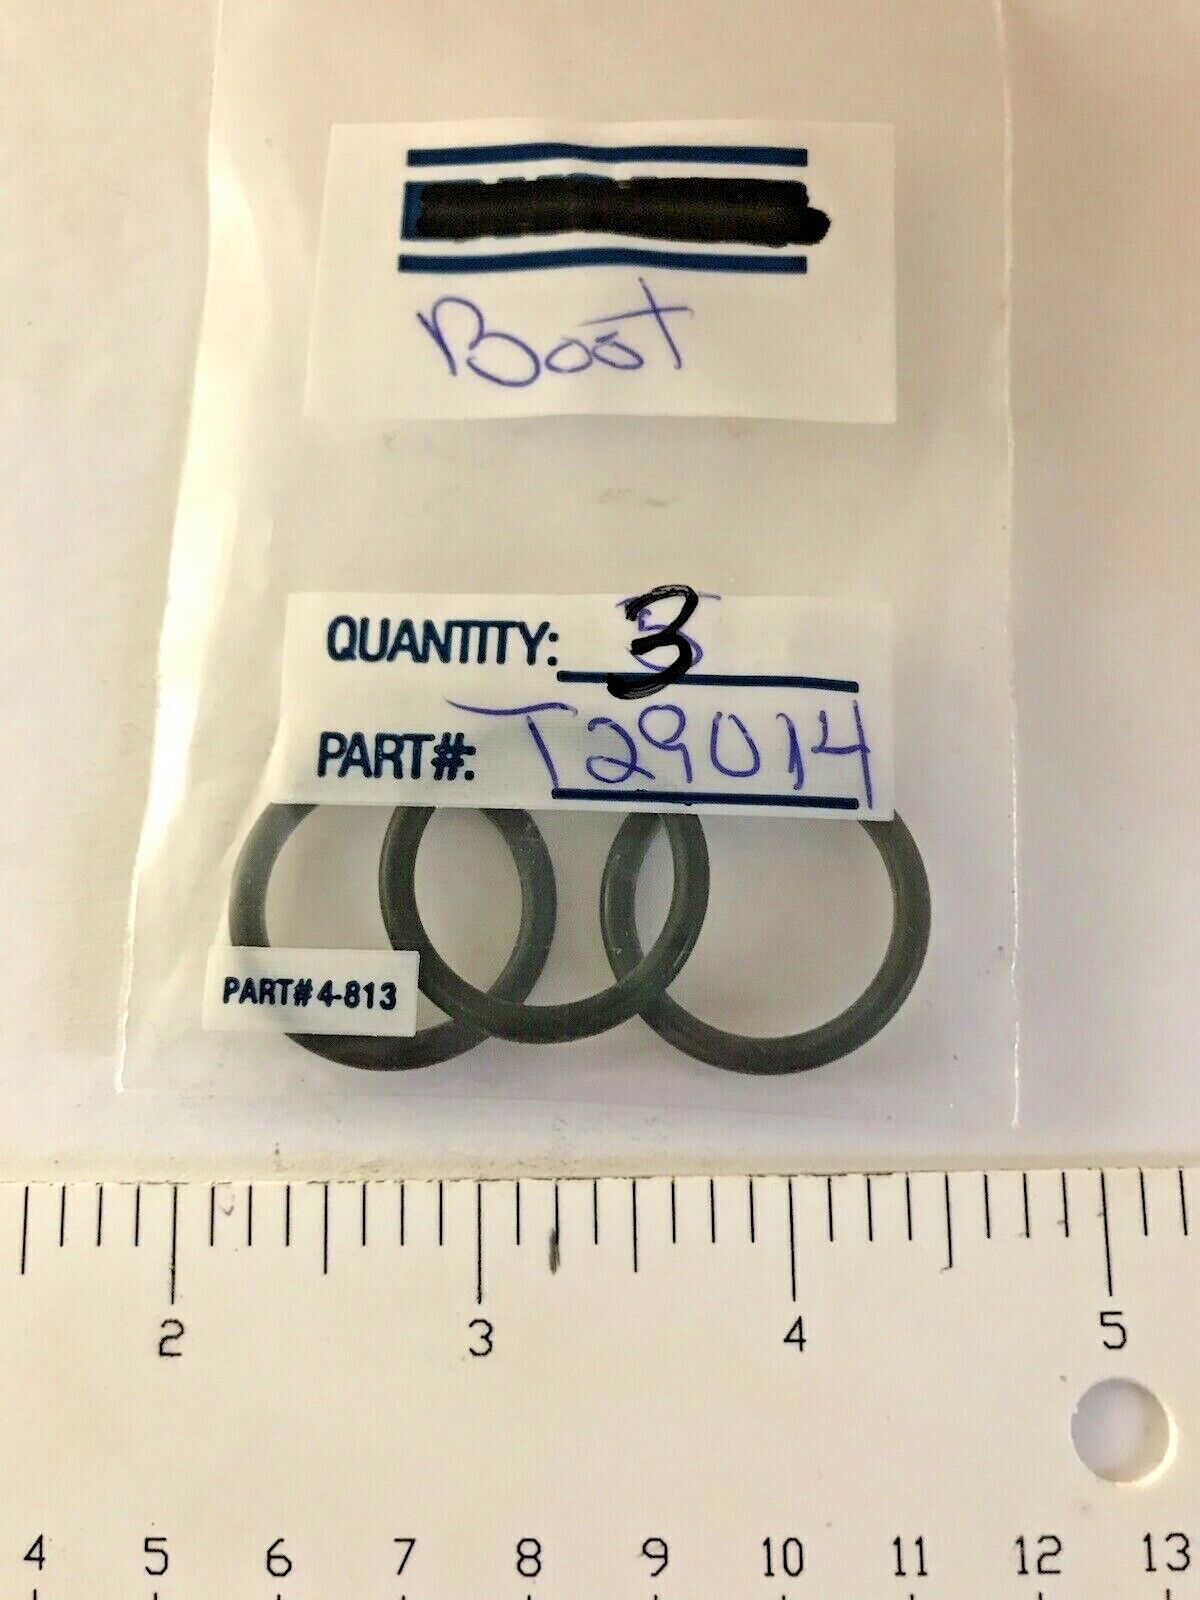 LOT OF 4 PART NUMBERED BOSTITCH O-RINGS  FOR PNEUMATIC FASTENING TOOLS Bostitch T29014 / T29012 / T29010 / T29011 - фотография #5